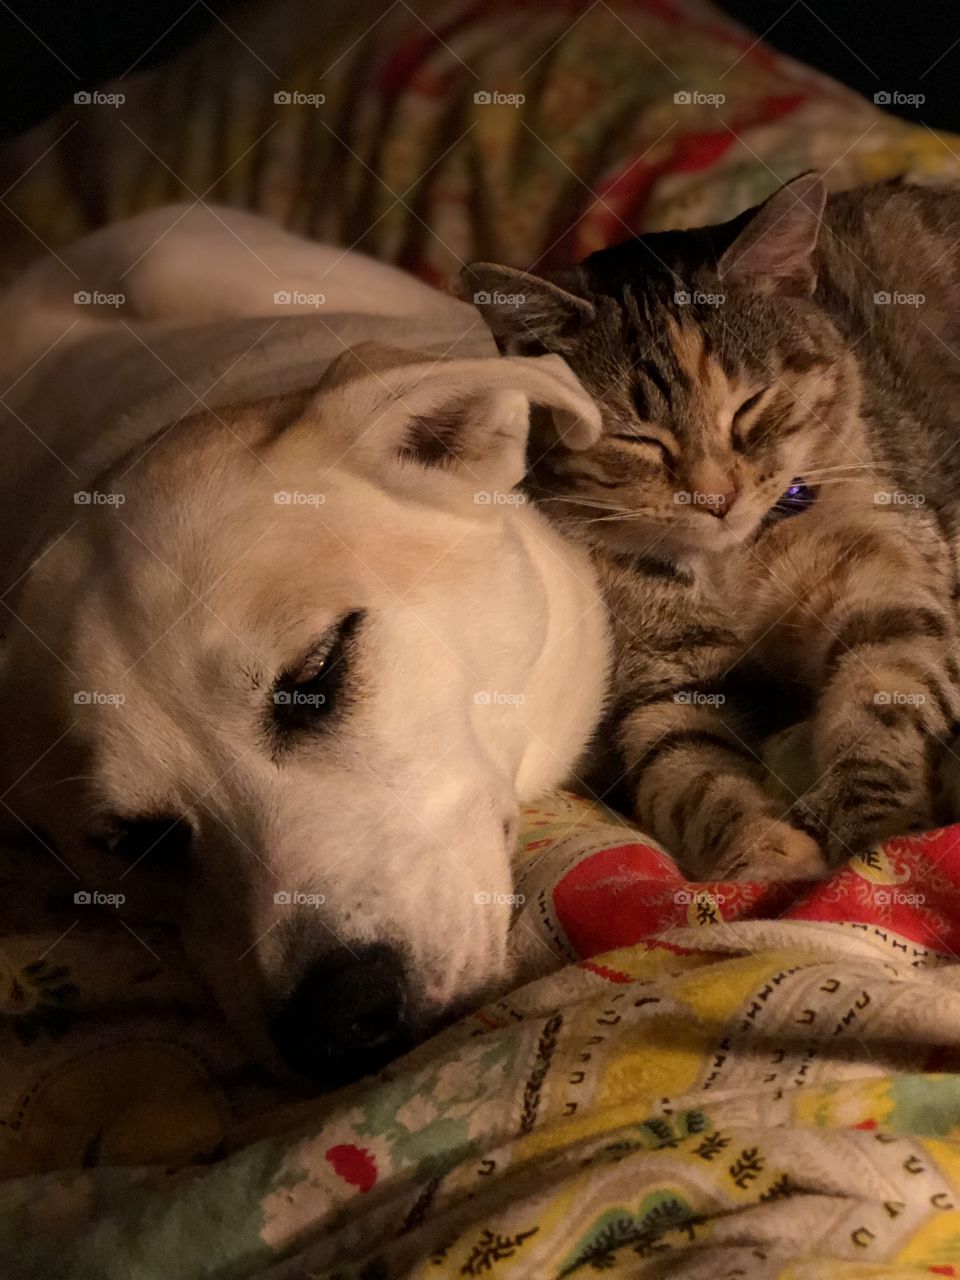 White dog snuggling with kitten friend in bed on colorful blanket 